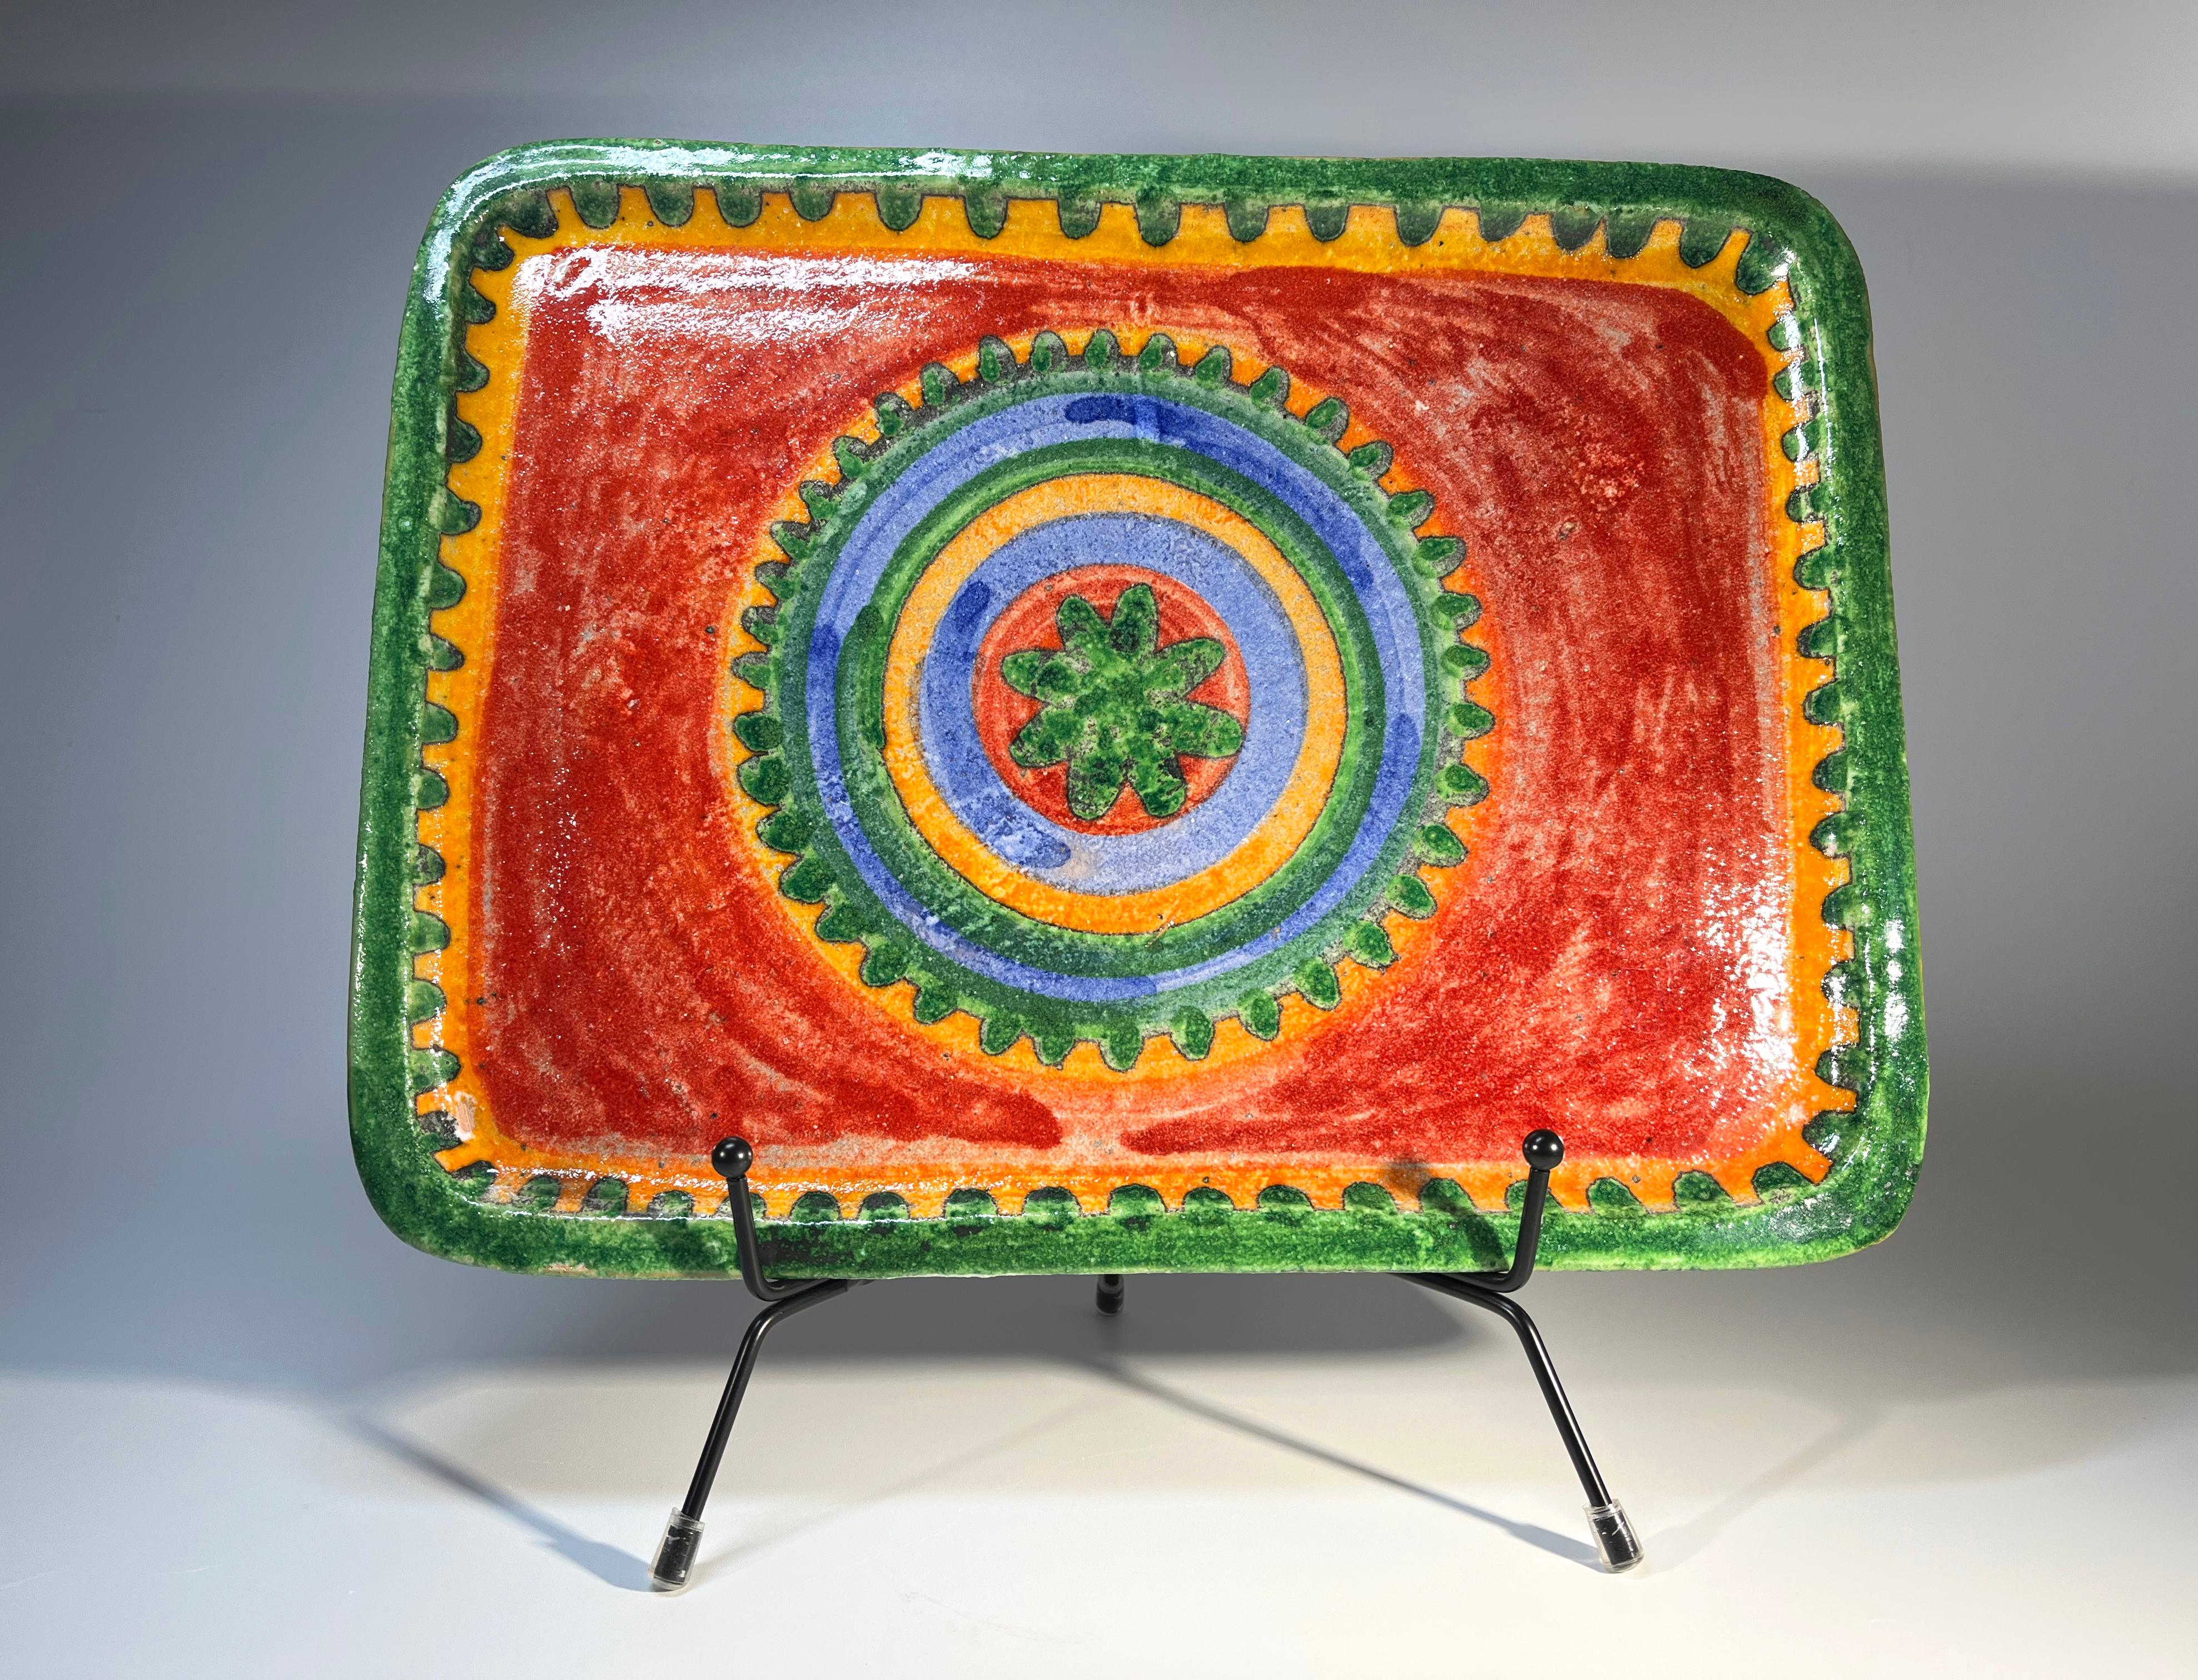 Colourful and vibrant hand painted ceramic platter by DeSimone, Italy
Handmade in Italy during the 1960's
This is a substantially heavy piece. Weighs 2lb 9oz
Circa 1960's
Signed DeSimone, Italy. 
Height 1 inch, Width 11.25 inch, Depth 8.5 inch
In